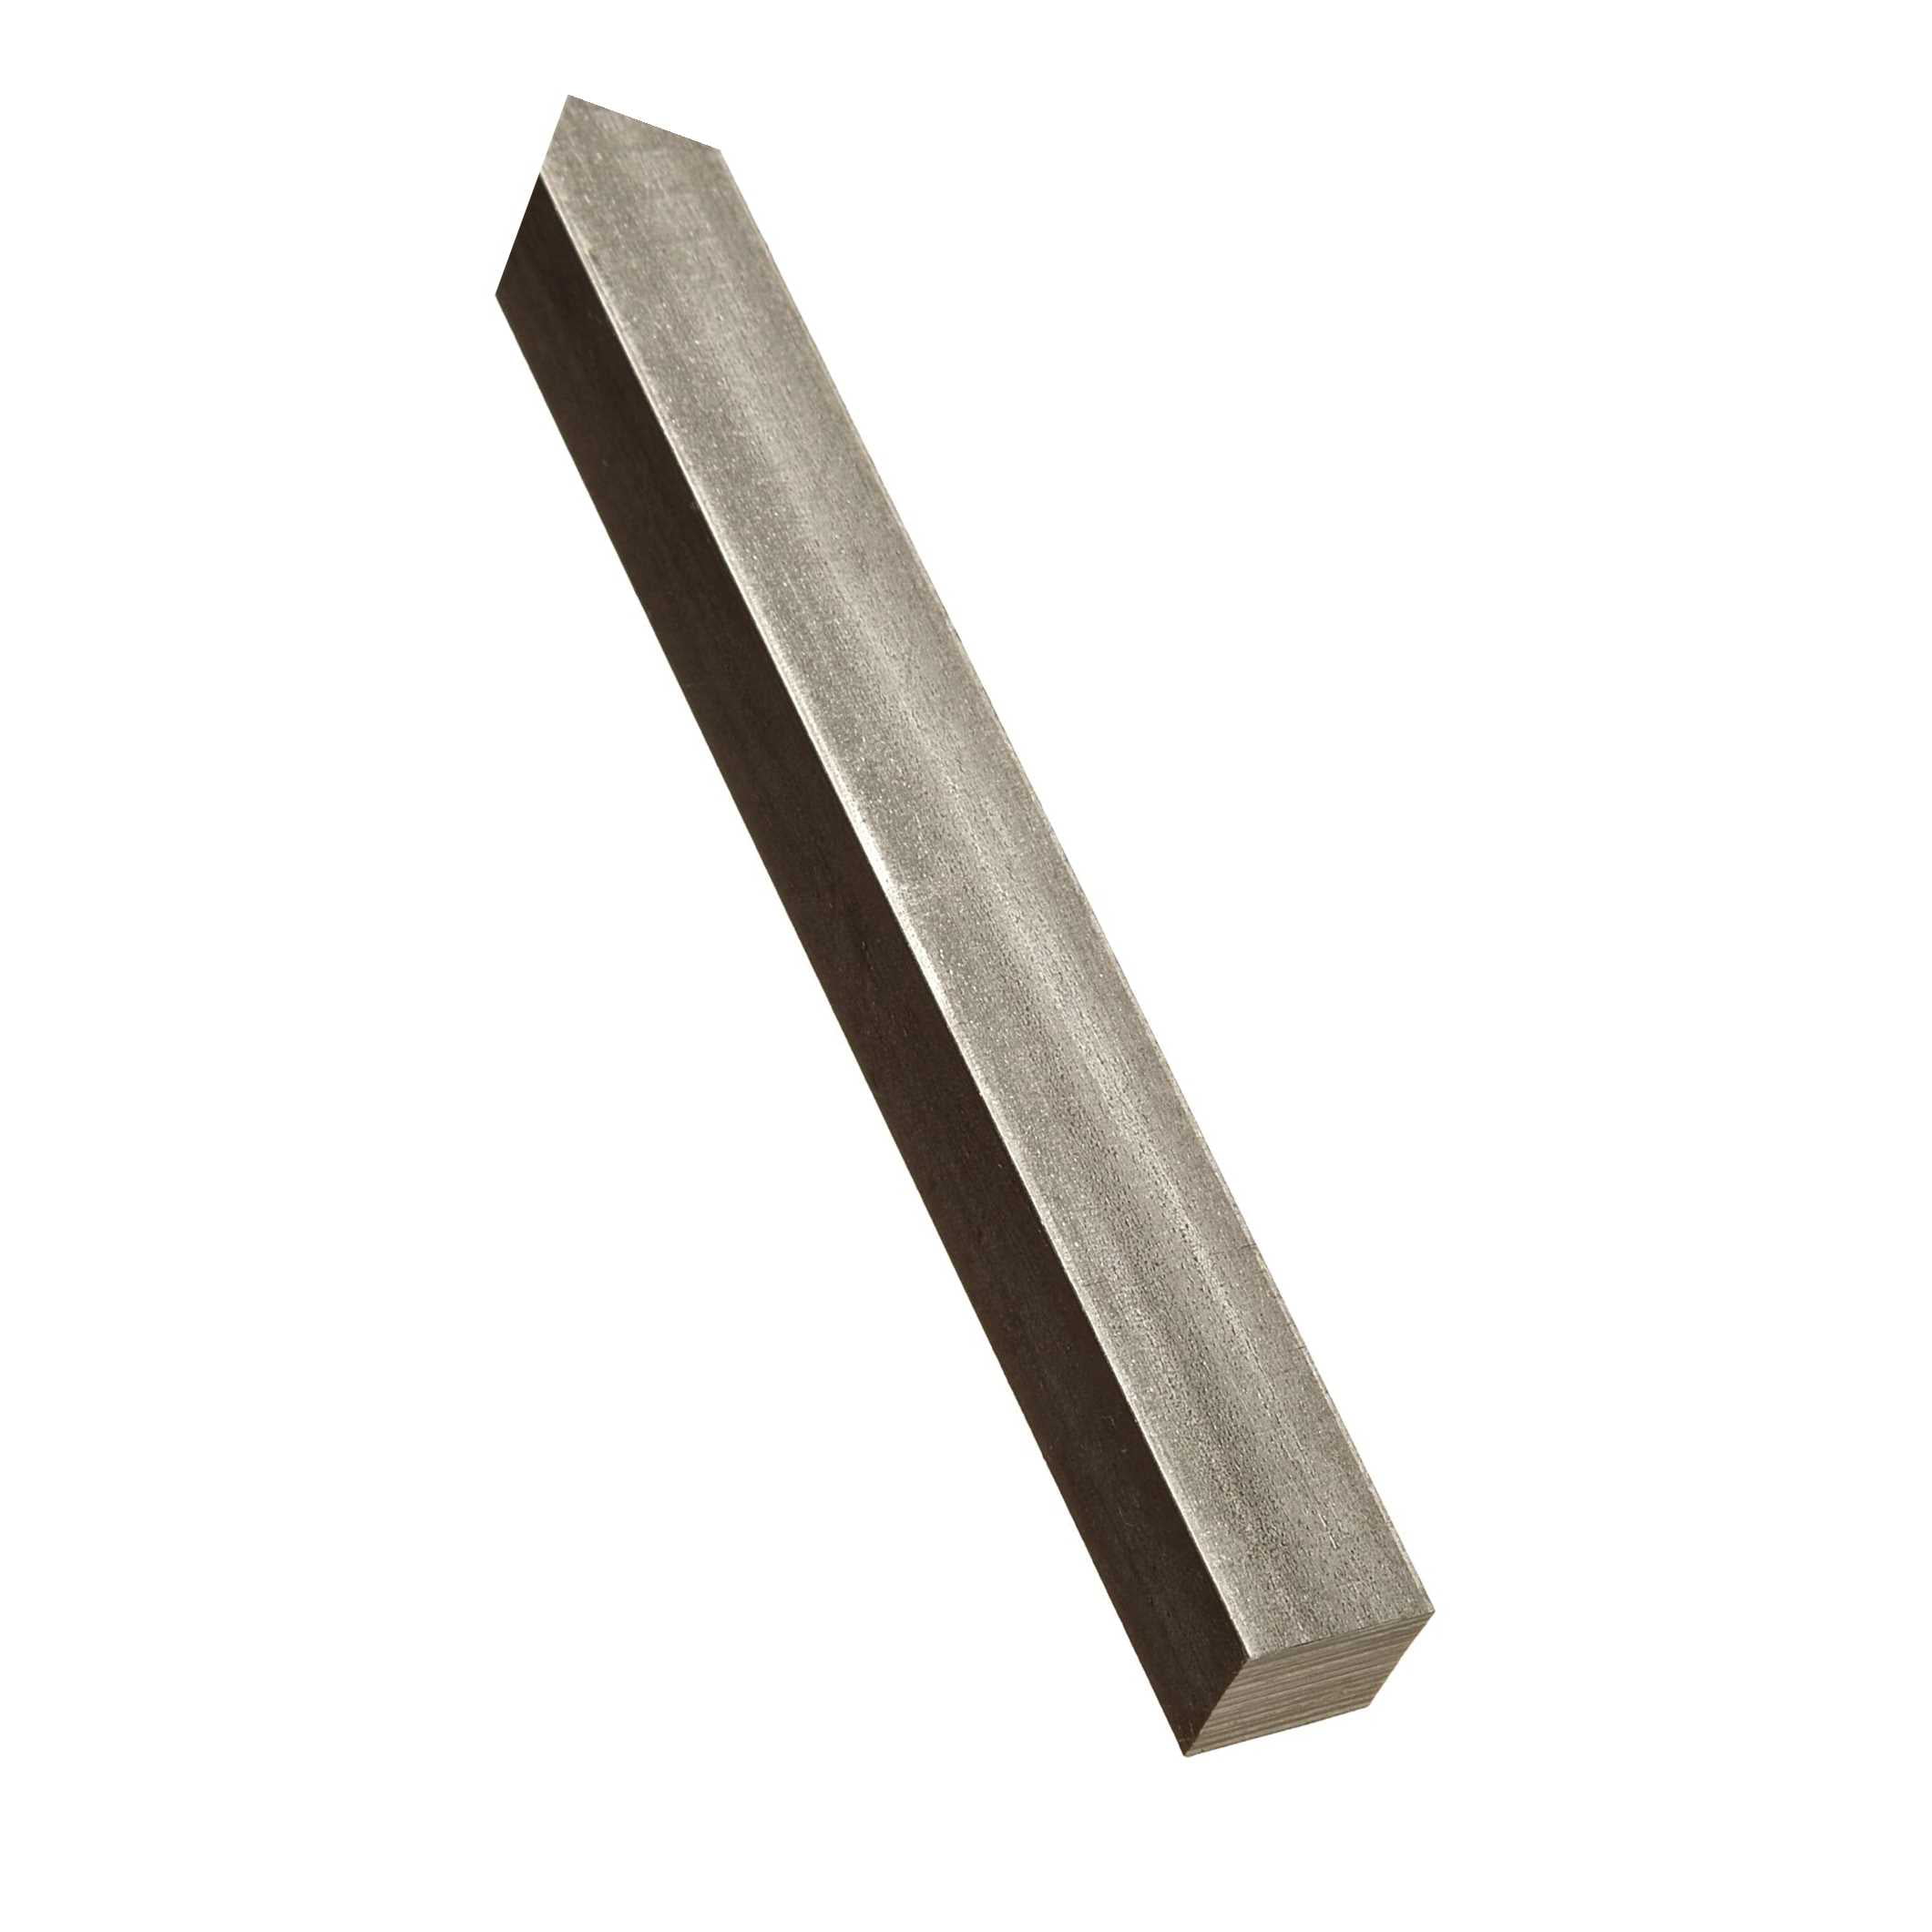 18-8 Stainless Steel Key Stock Undersized Tolerance 3/16" Thickness 3/16" 